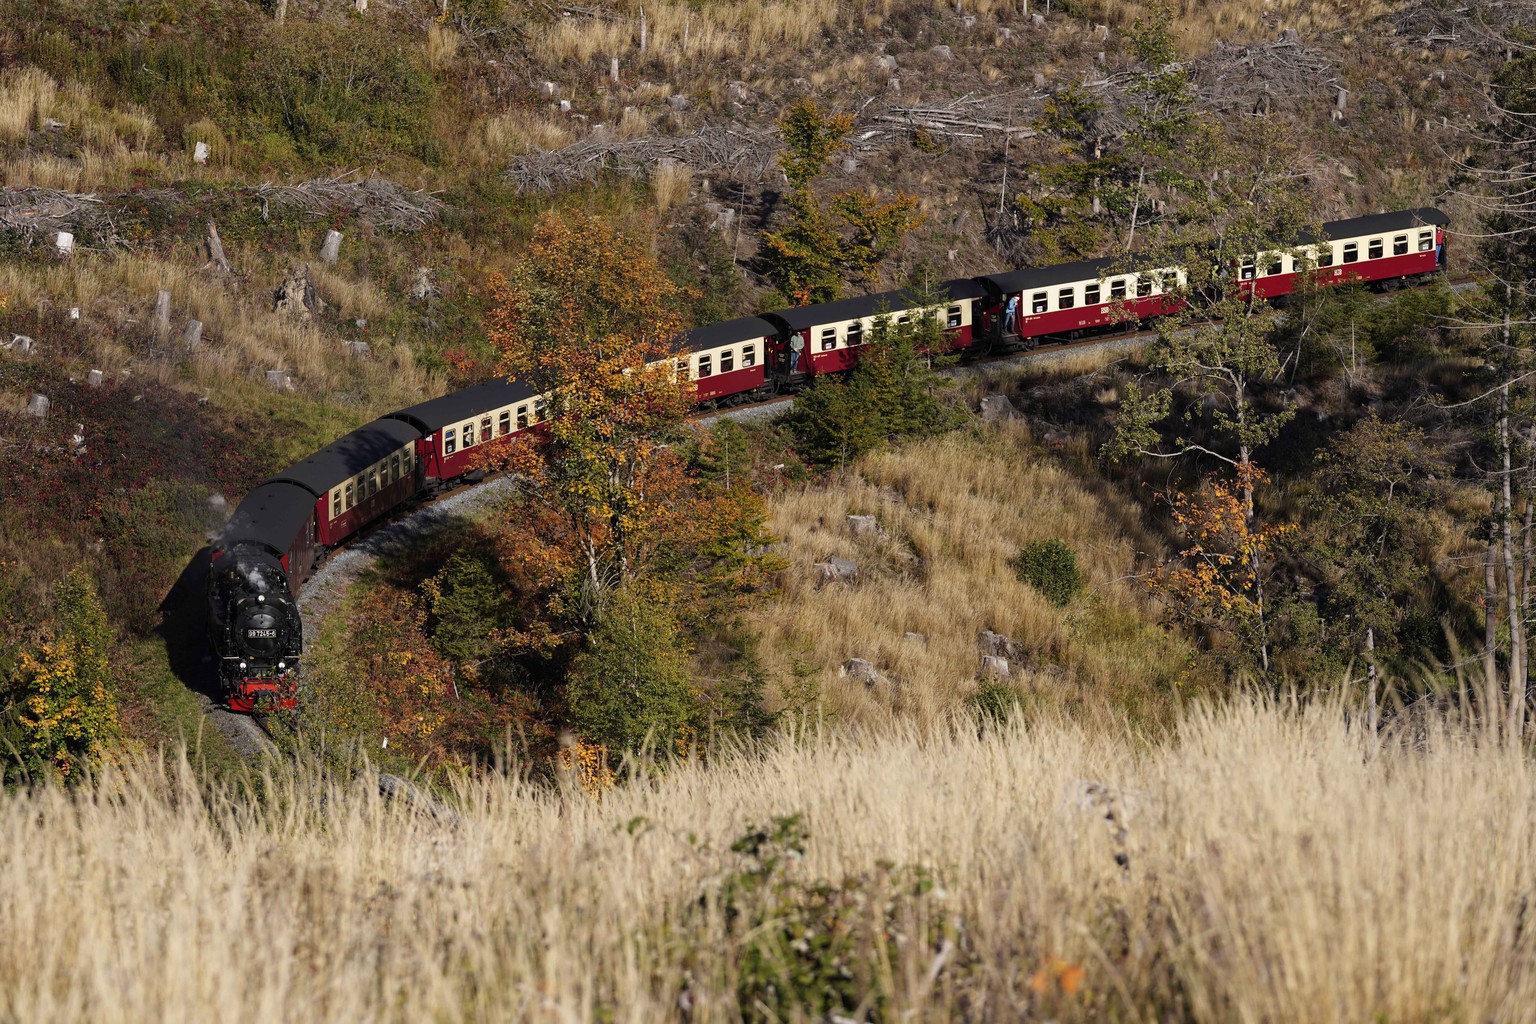 A steam train travels through the Harz mountains destroyed by the bark beetle and drought near the train station Drei Annen Hohne, Germany, Friday, Oct. 7, 2022. (AP Photo/Matthias Schrader)